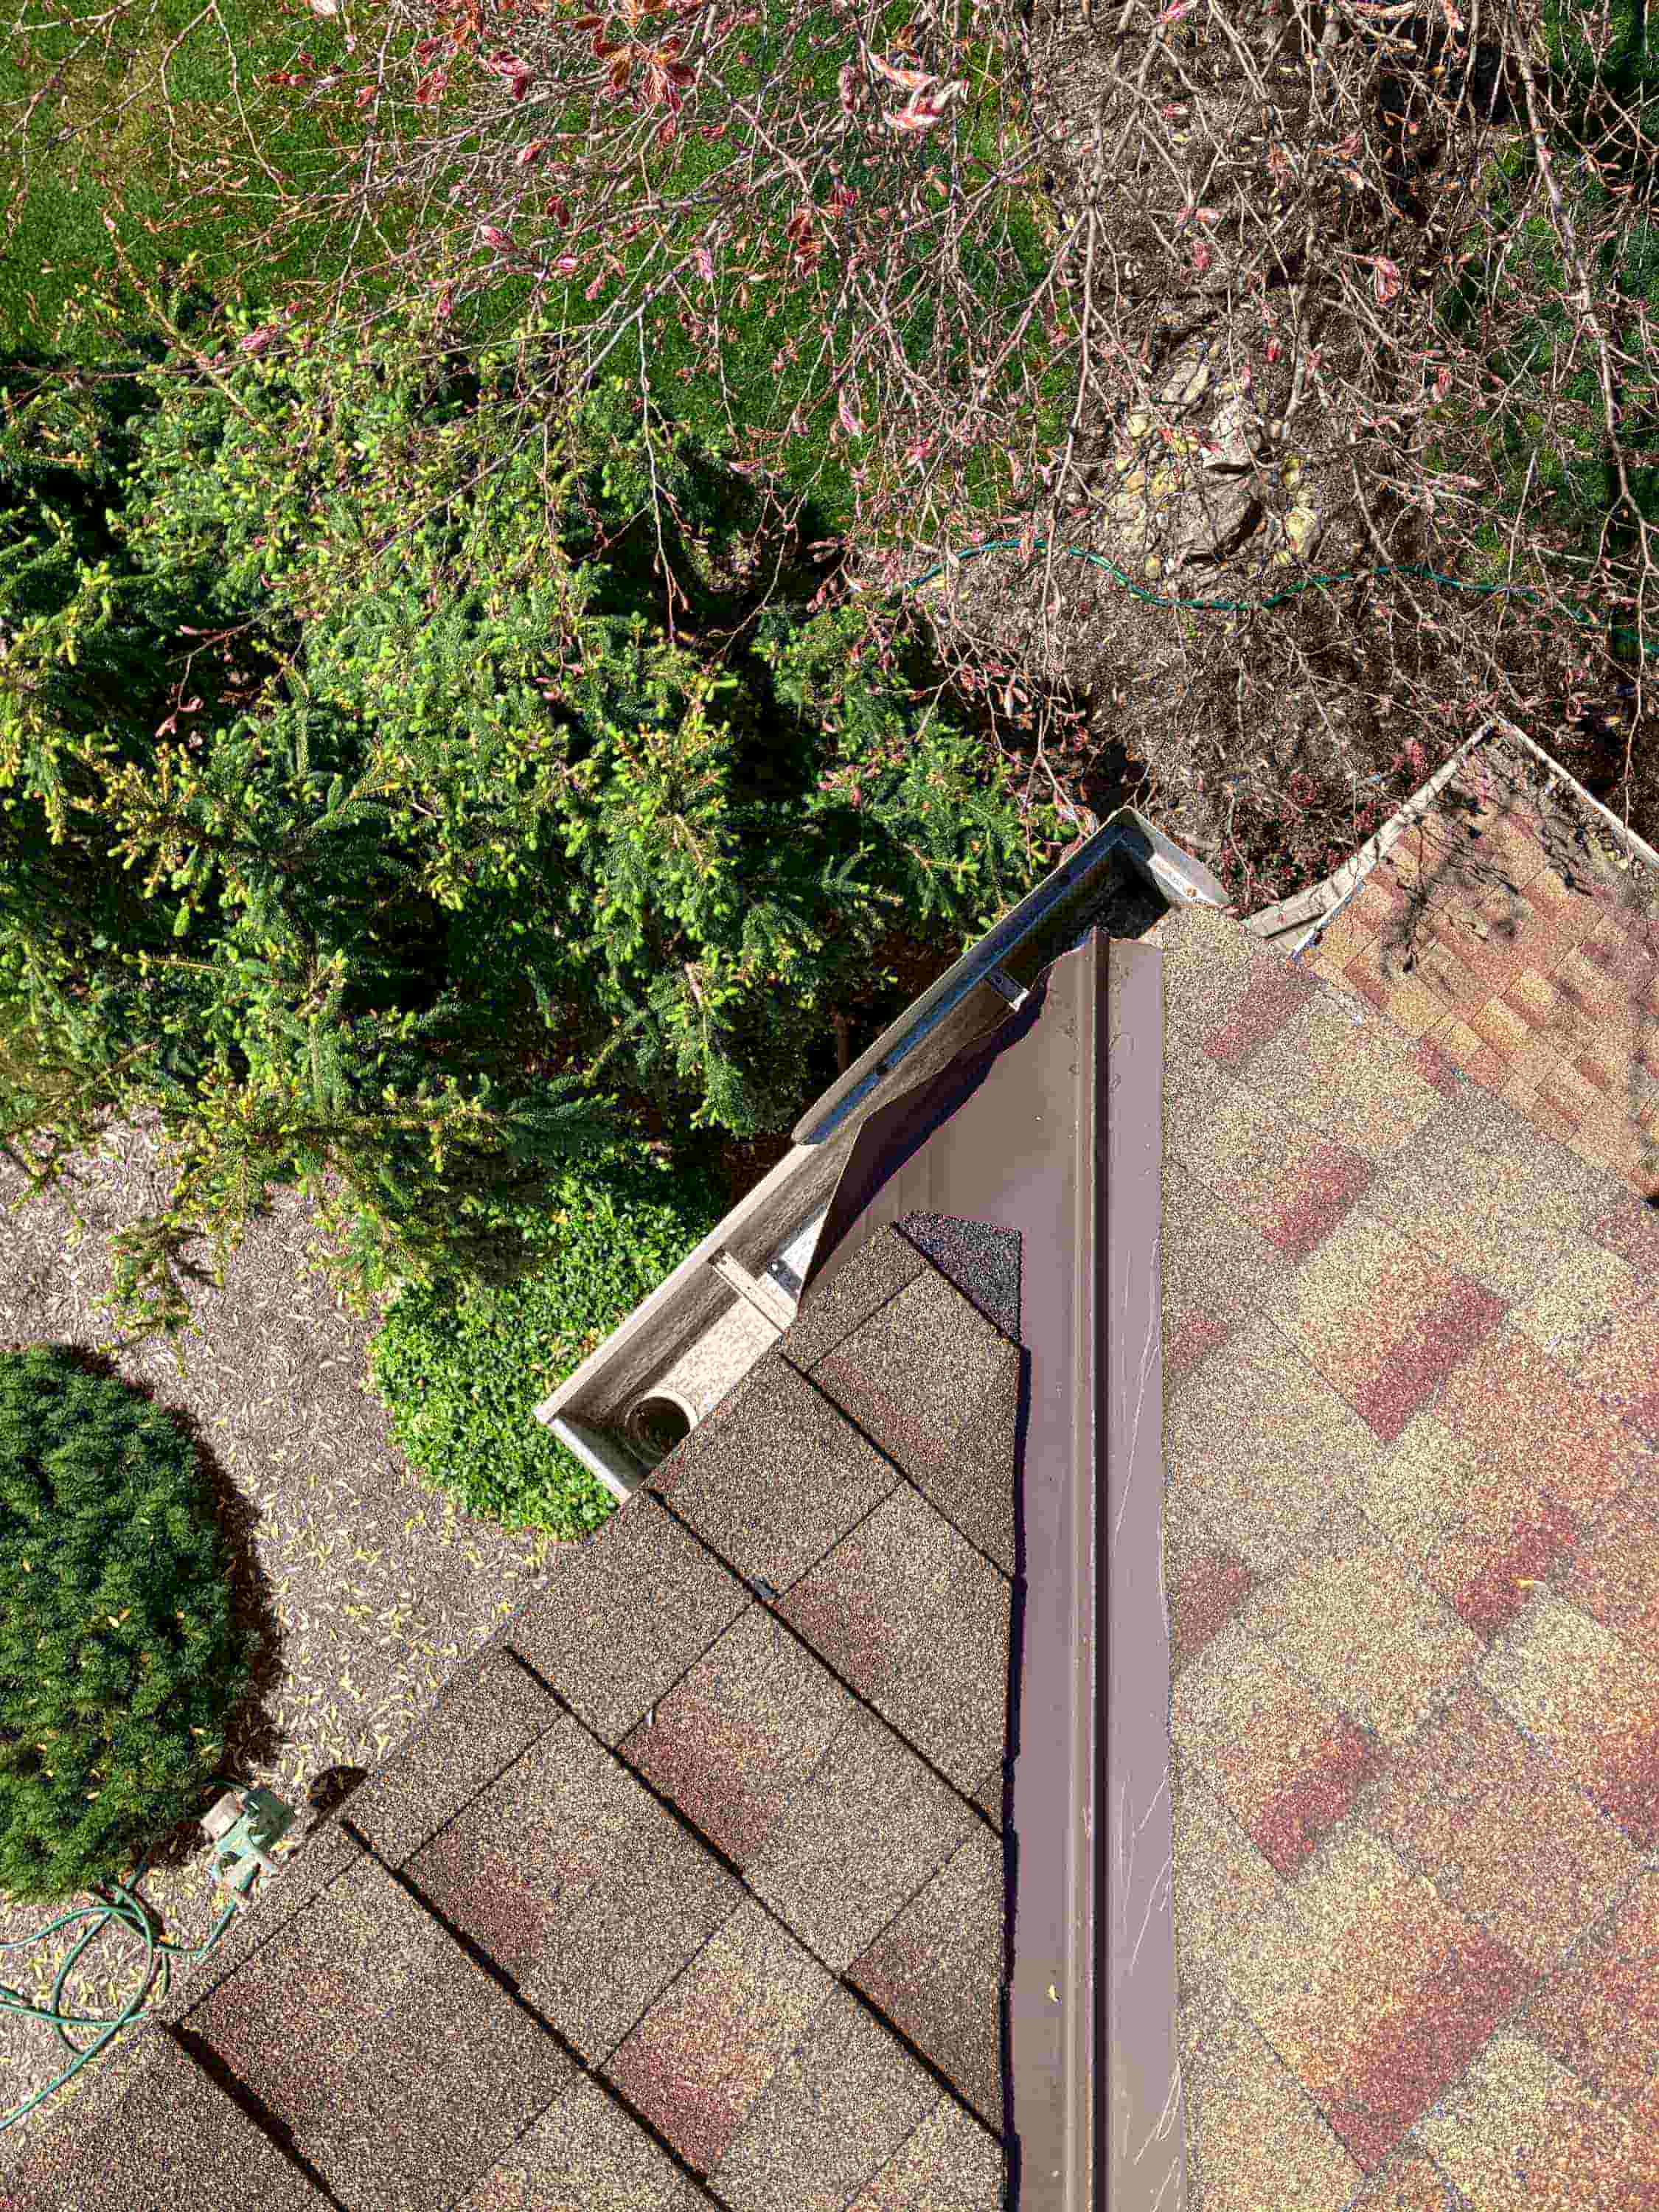 how to fix guttering